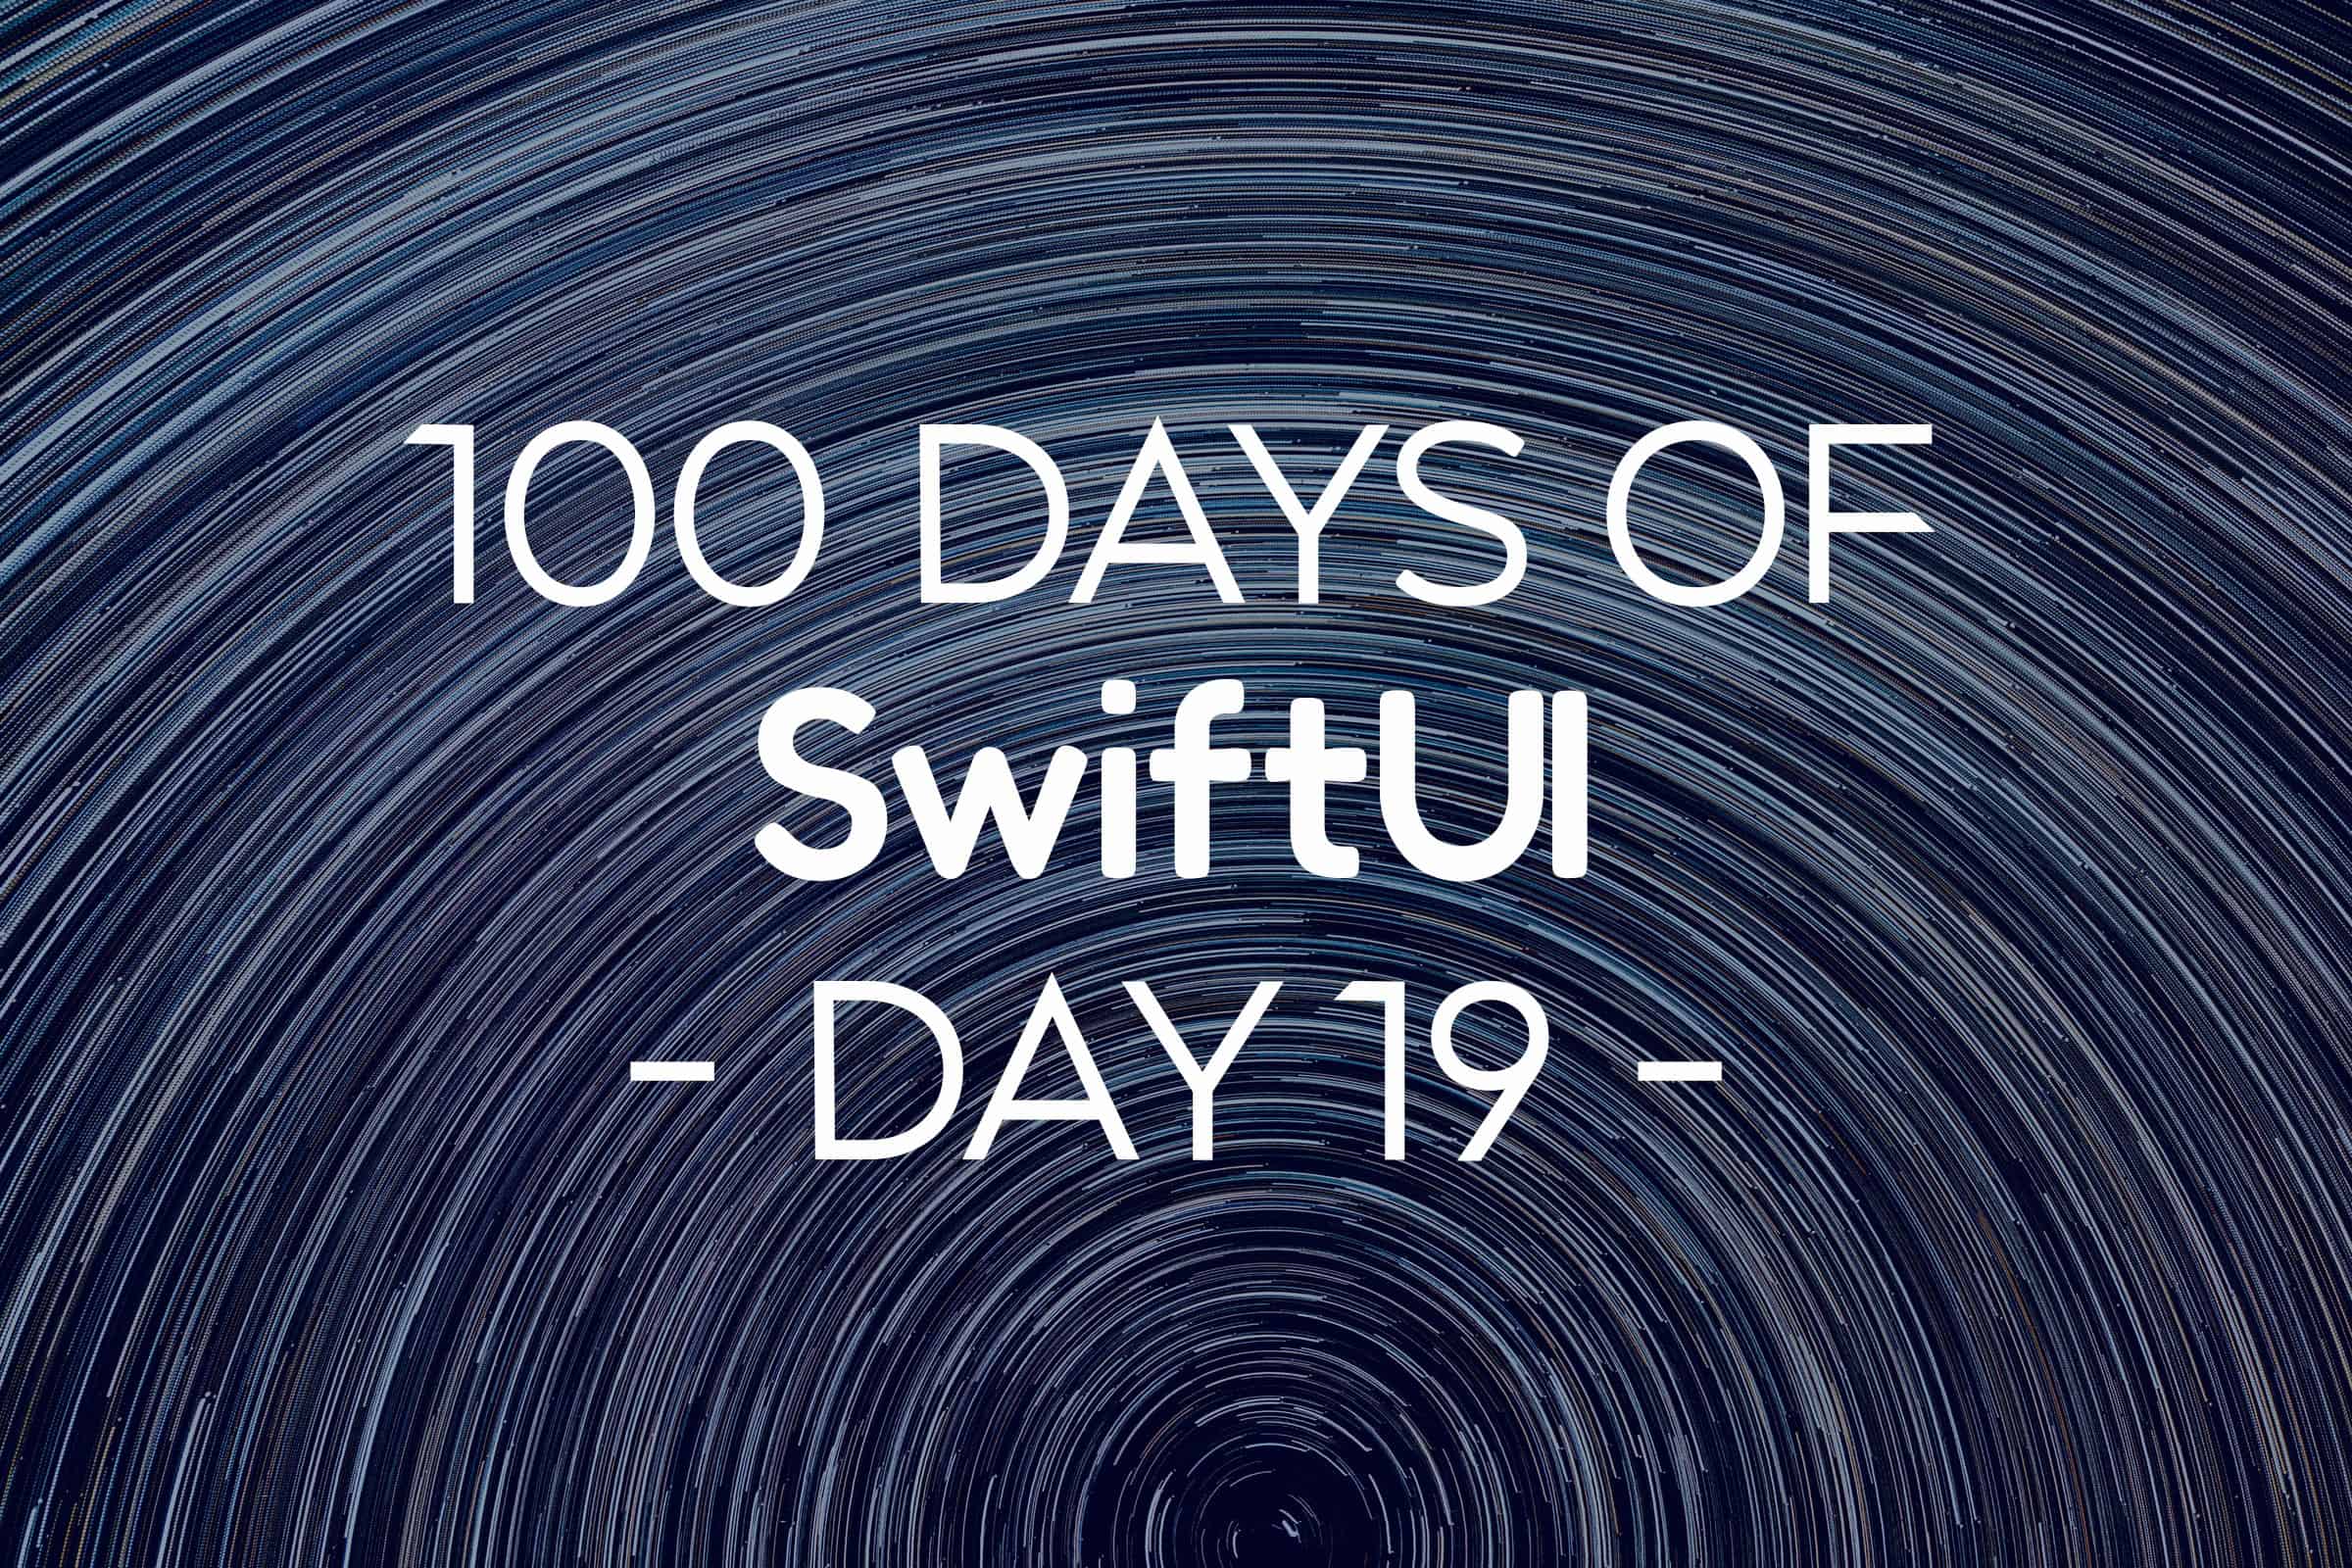 100 Days of SwiftUI Day 19